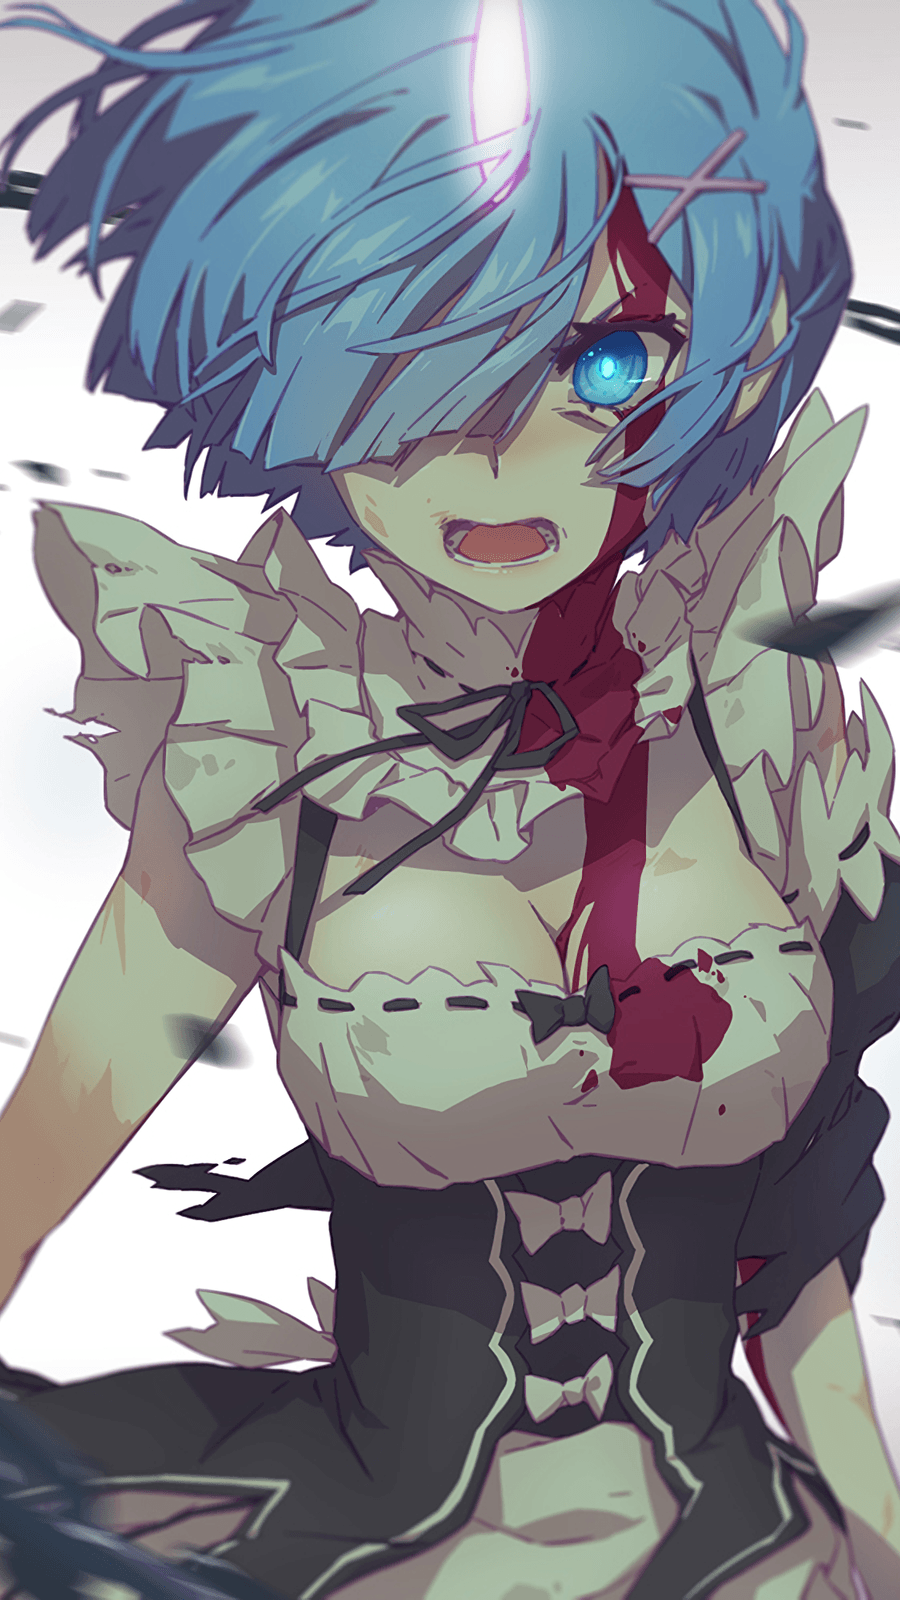 Rem [Re:Zero] (900x other resolutions in comments)